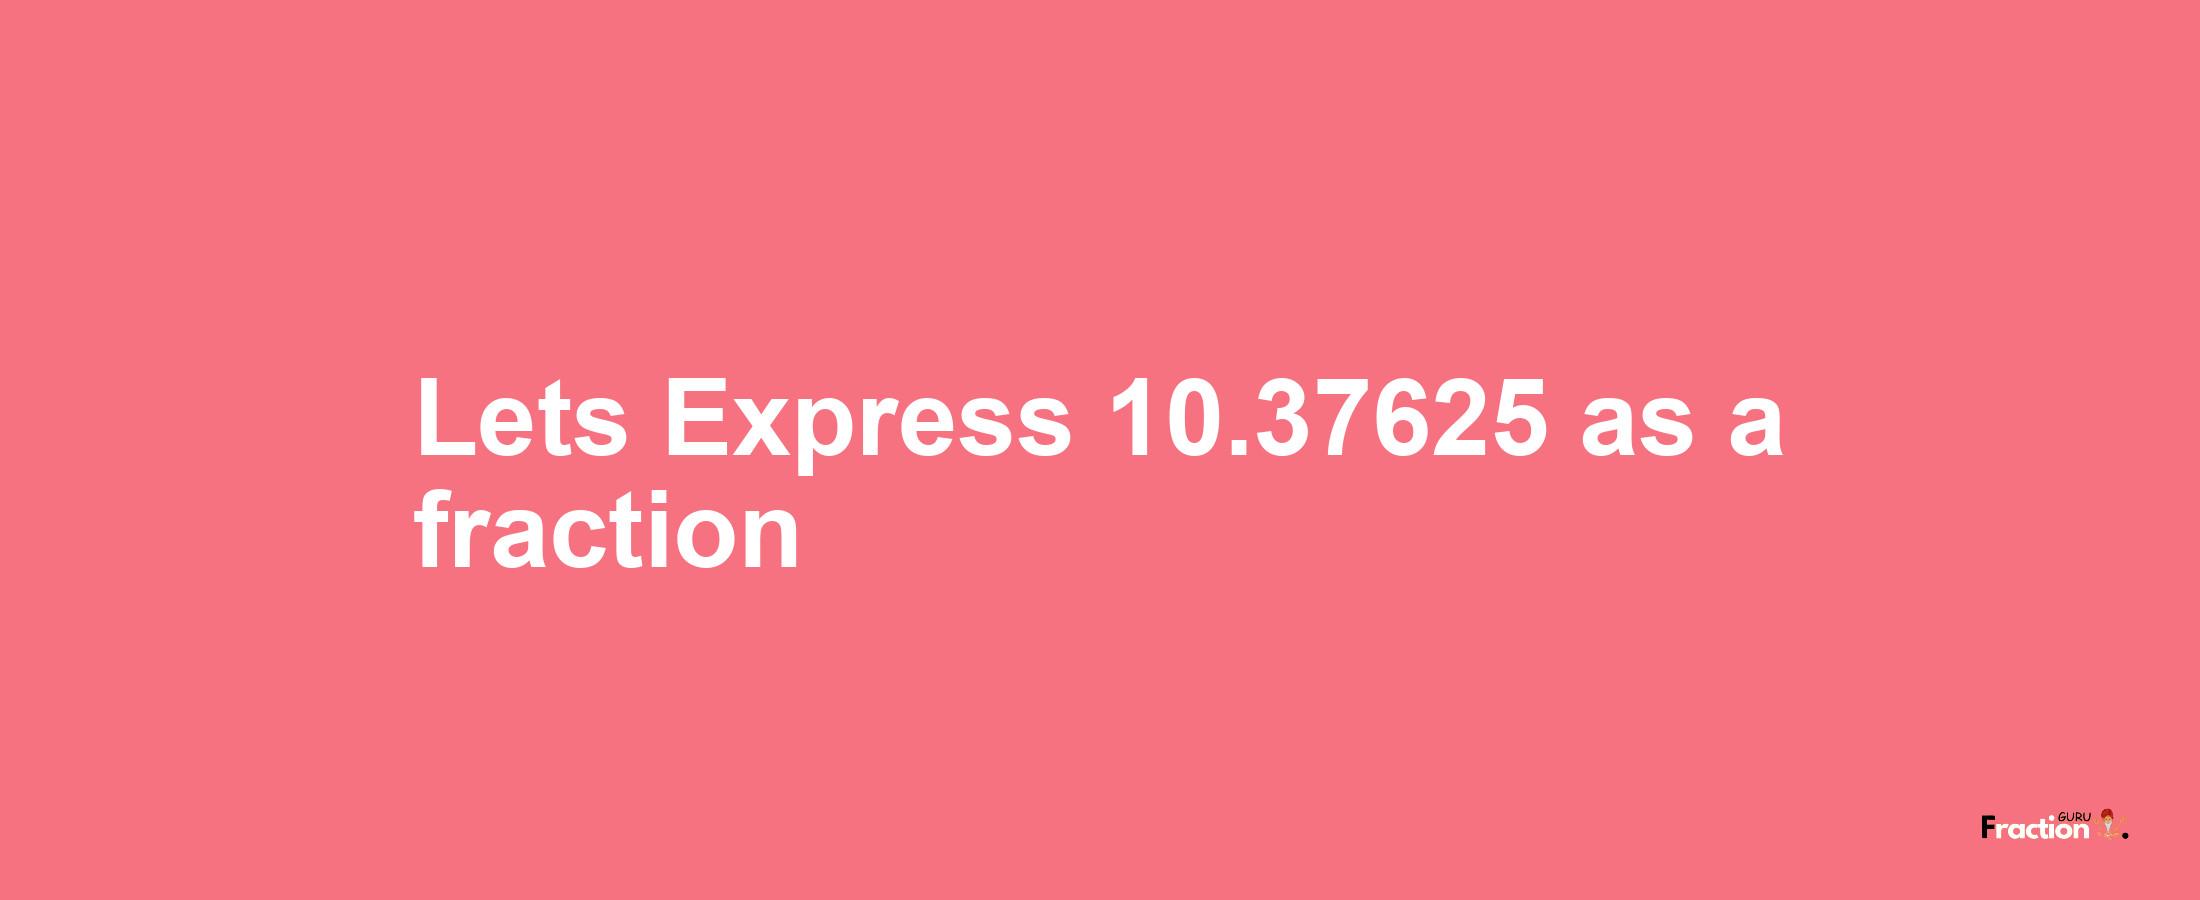 Lets Express 10.37625 as afraction